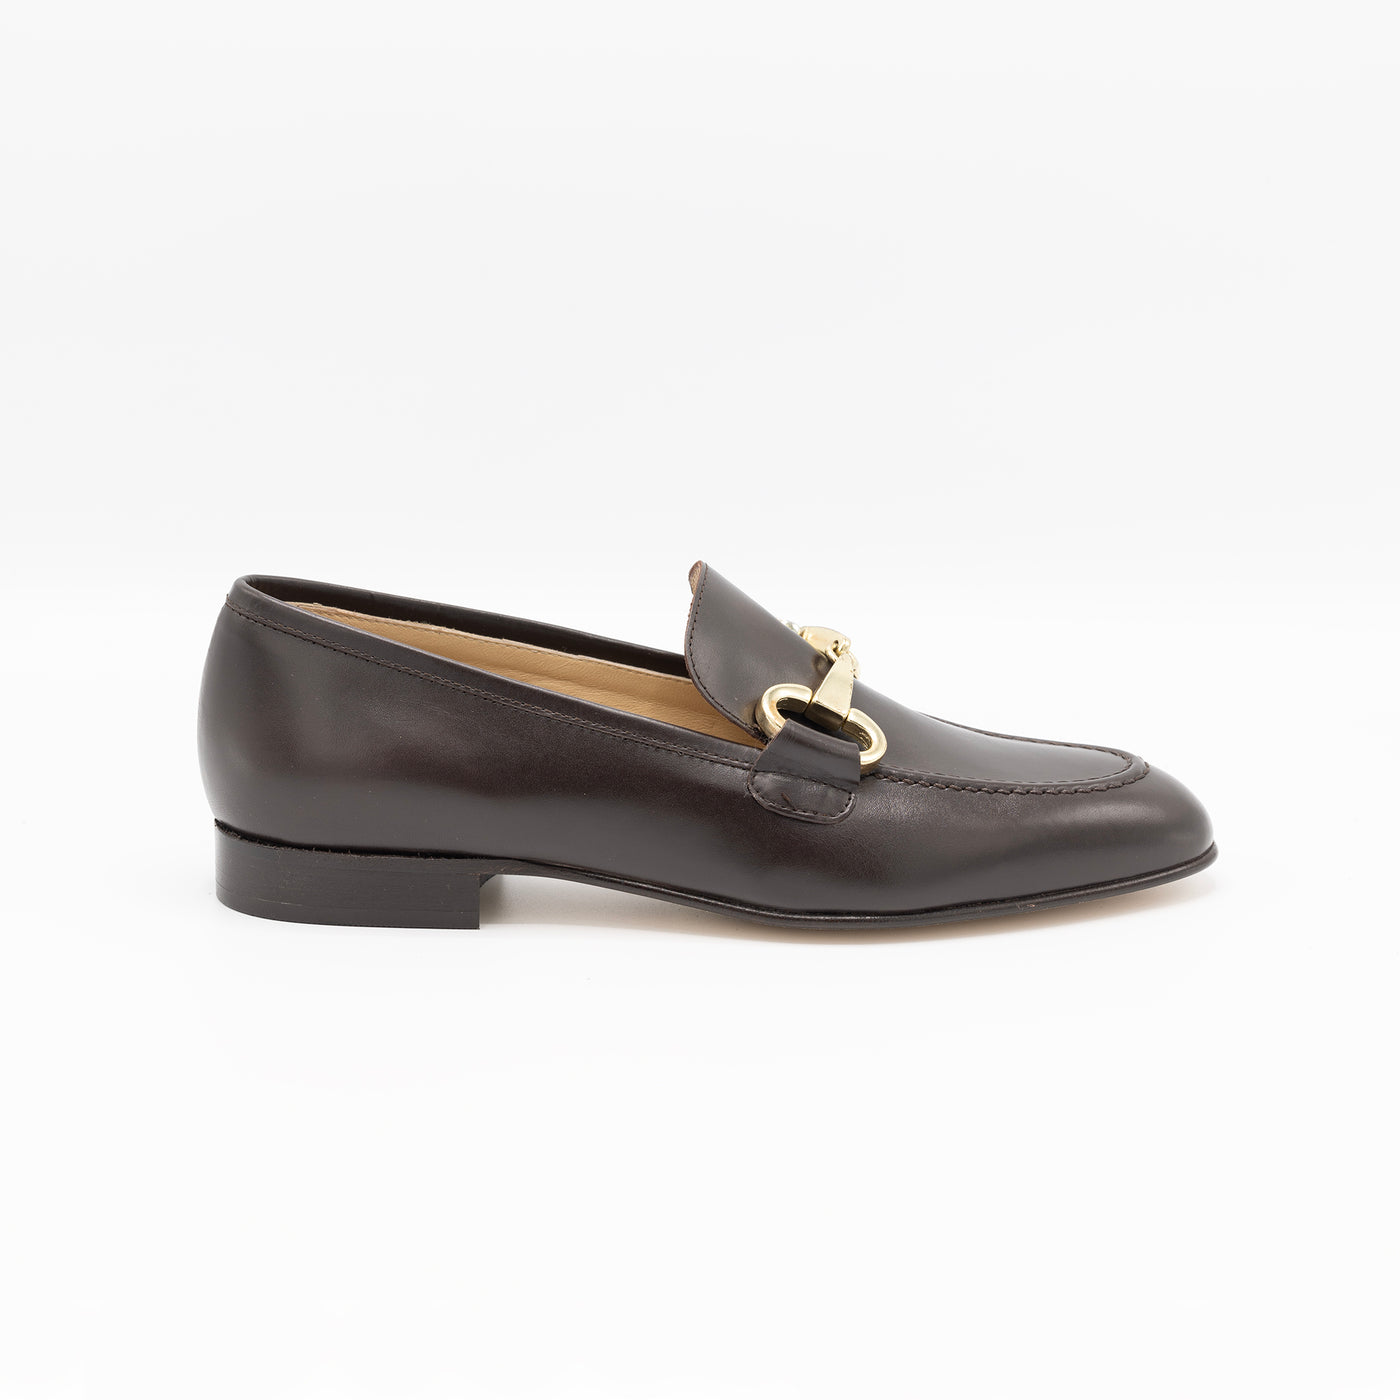 Horsebit Loafer in Brown Leather